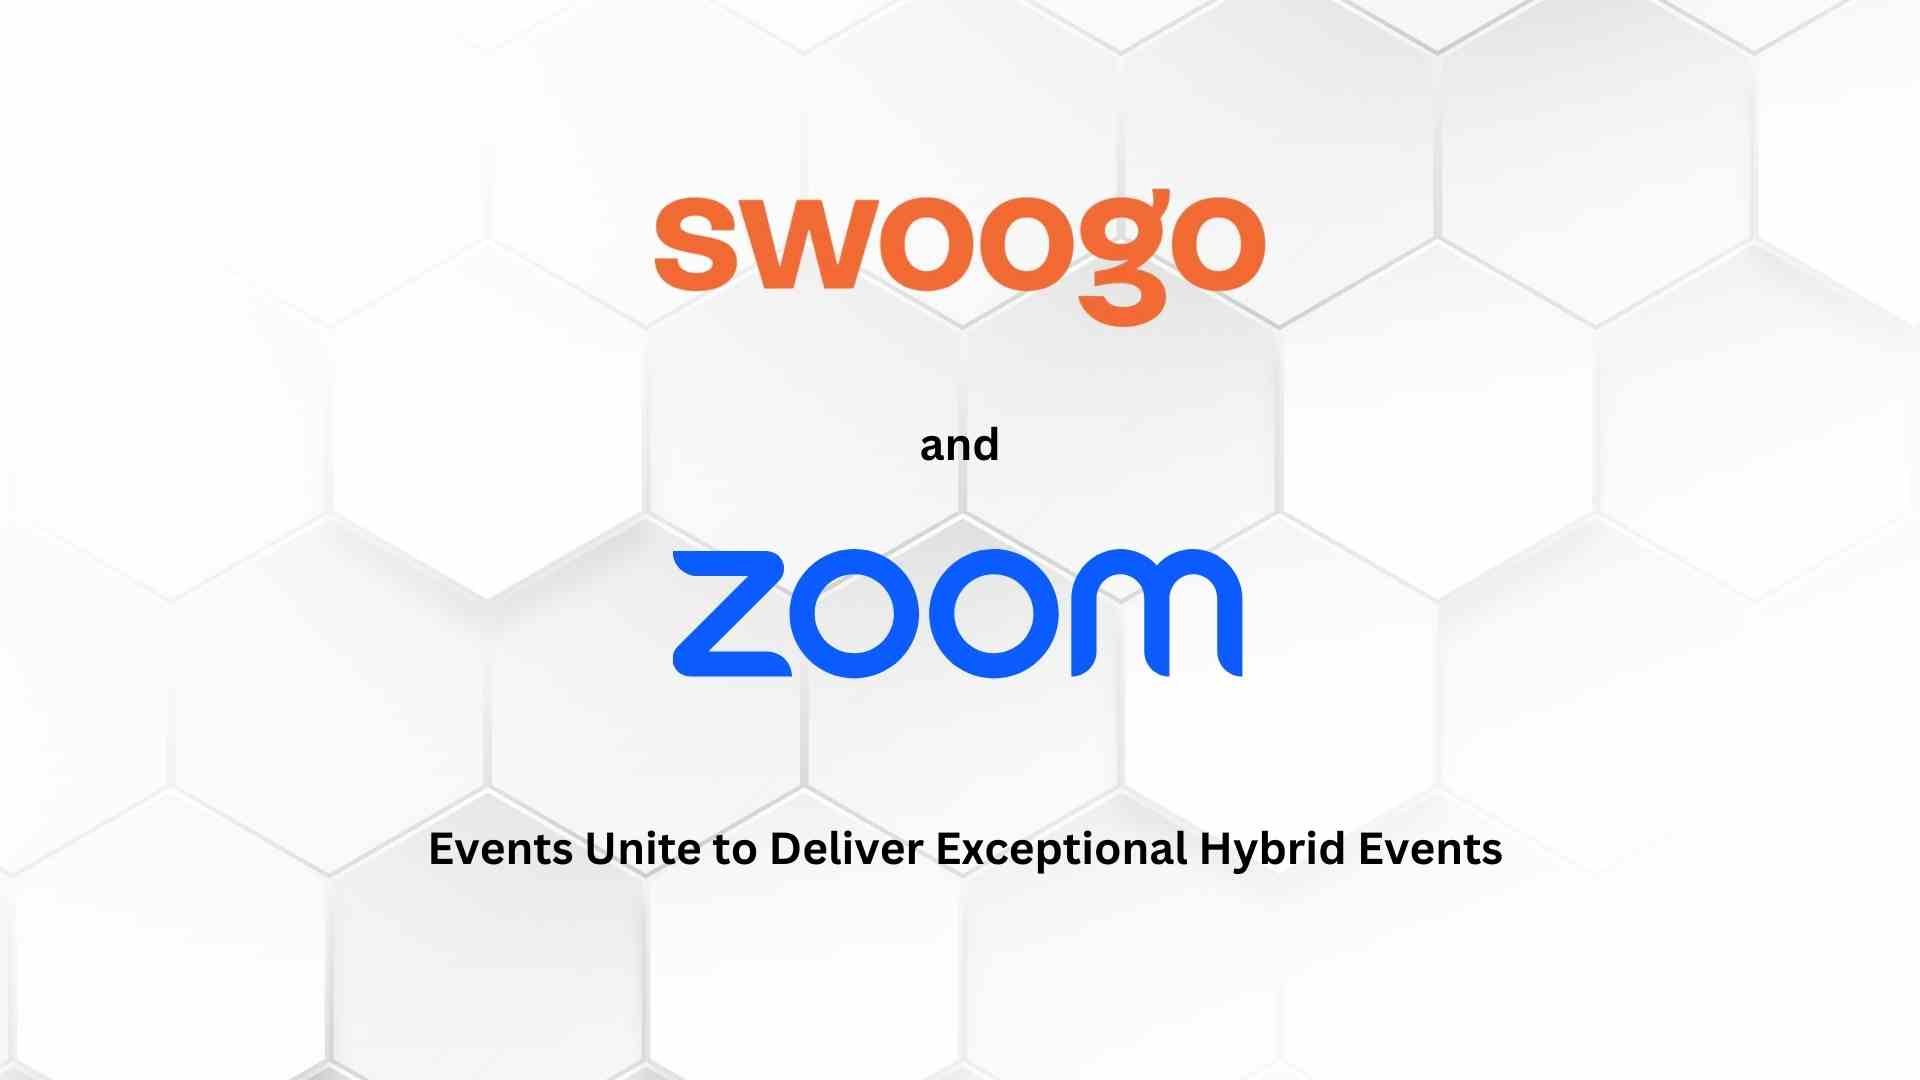 Swoogo and Zoom Events Unite to Deliver Exceptional Hybrid Events